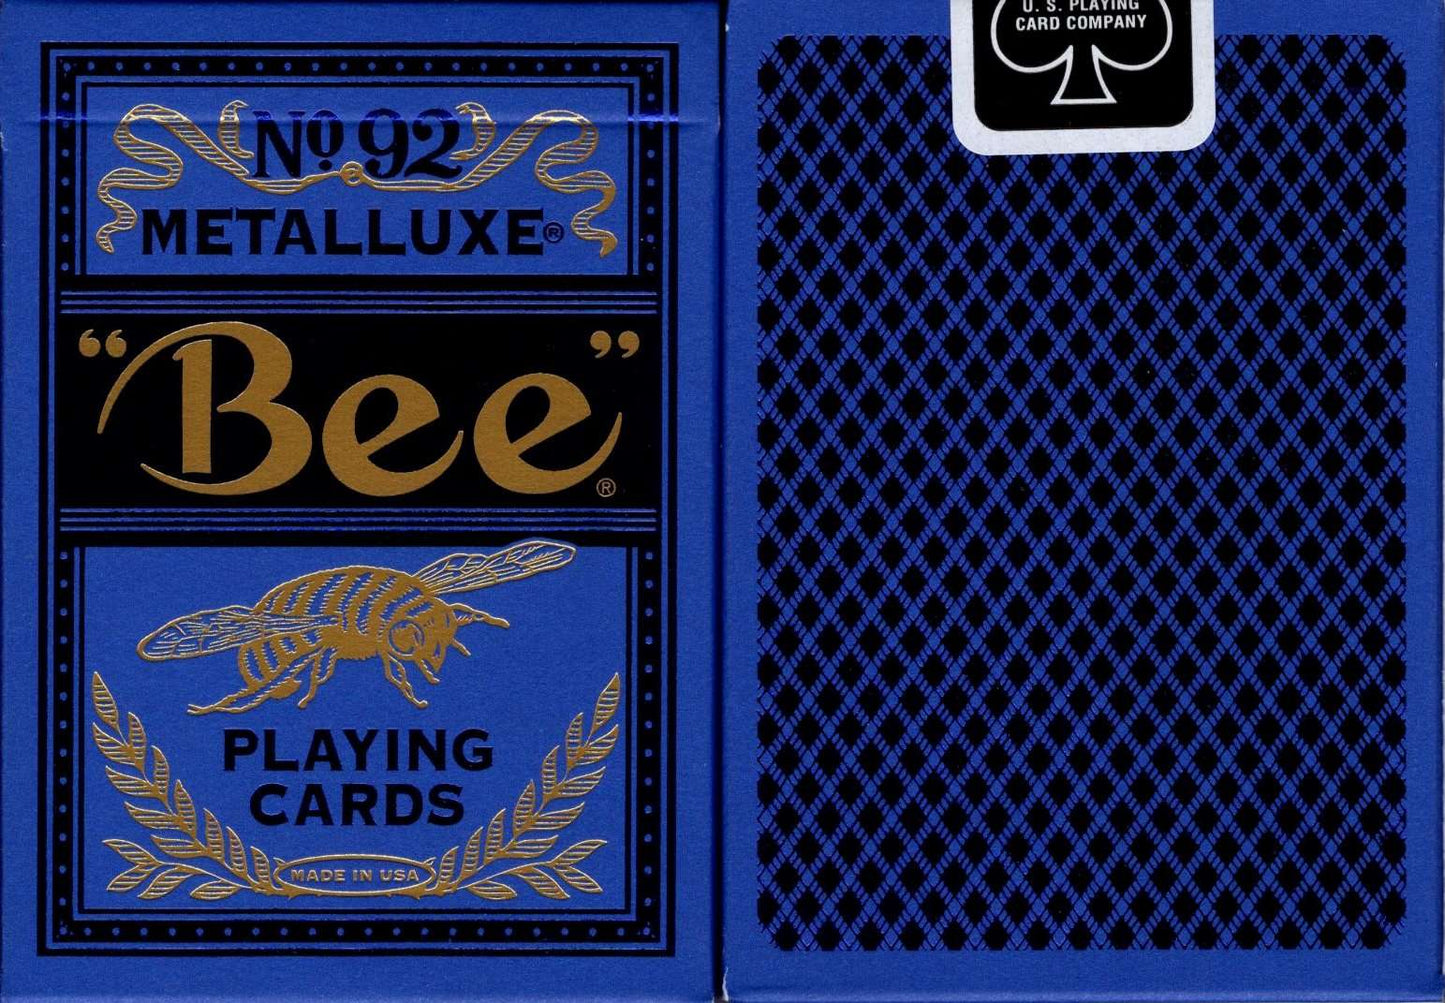 PlayingCardDecks.com-Bee MetalLuxe Blue Playing Cards